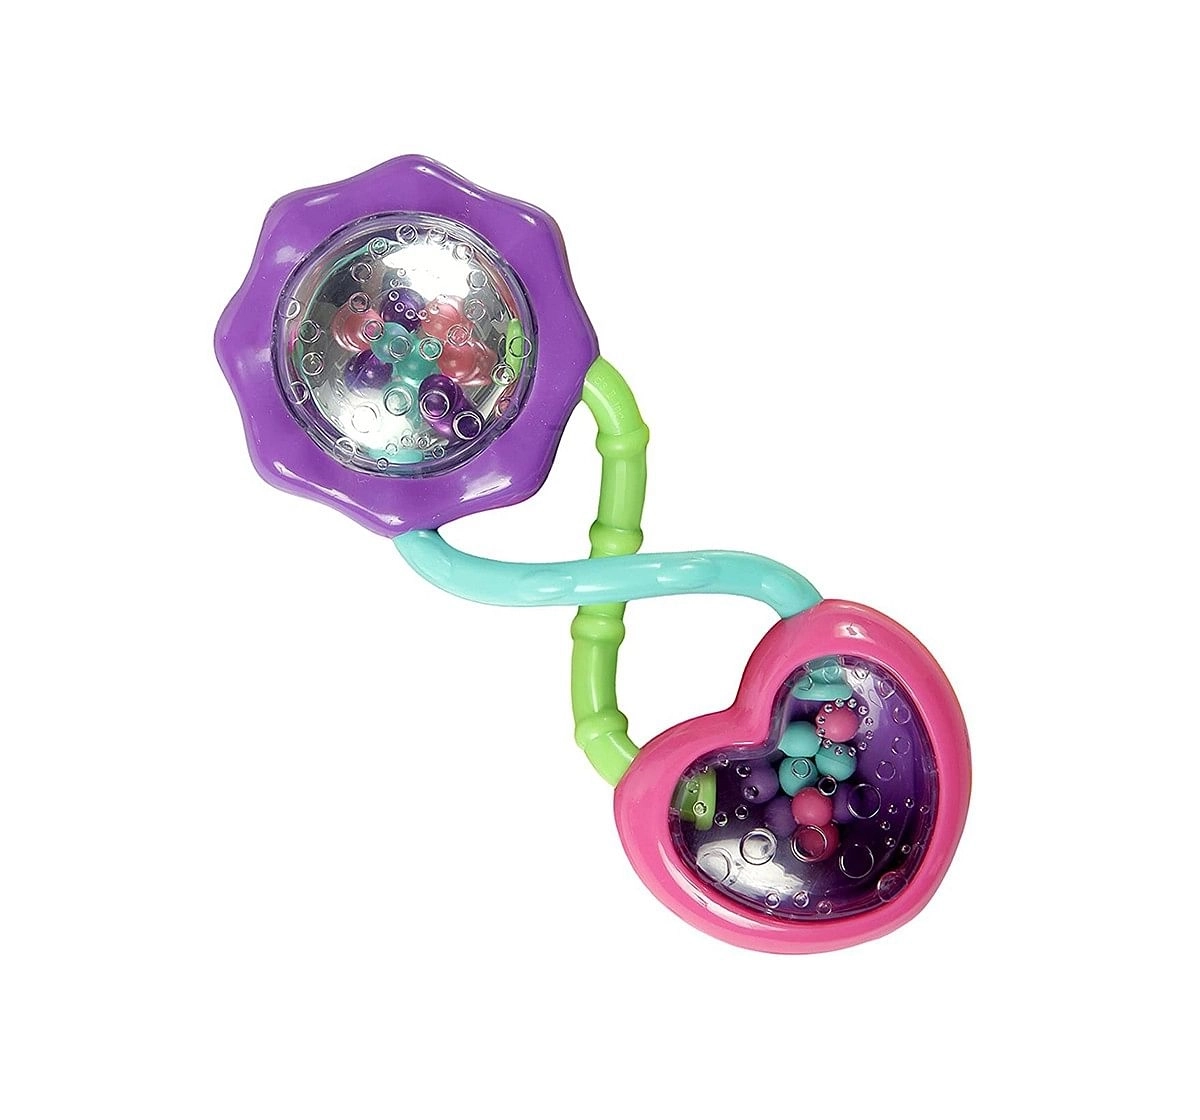 Kids Ii Bs Rattle & Shake Barbell - Purple Pink New Born for Kids Age 3Y+